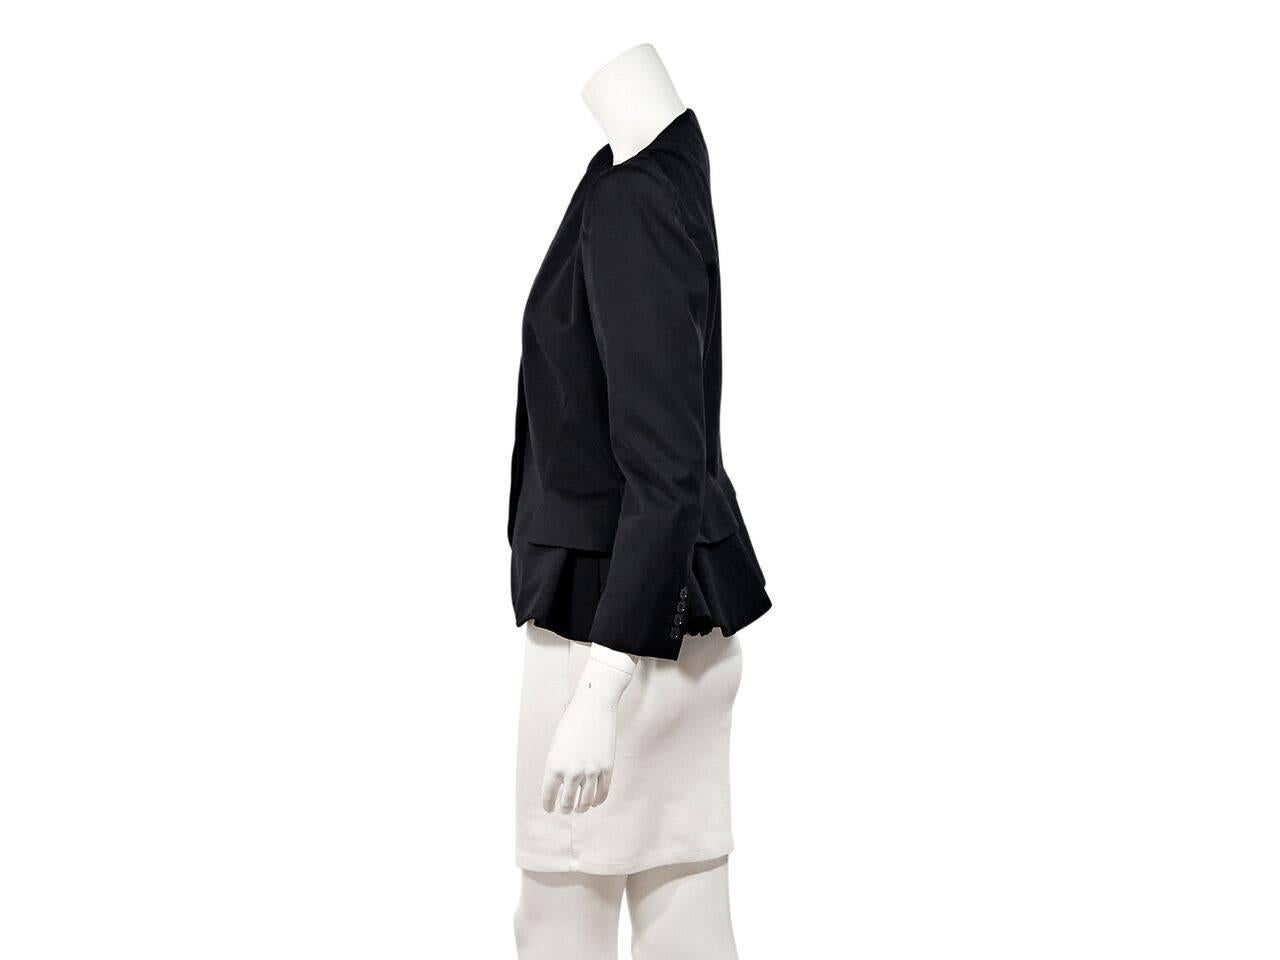 Product details:  Black peplum waist blazer by Alexander McQueen.  Bracelet-length sleeves.  Four-button detail at cuffs.  Concealed front closure.  Side waist flaps.  Label size IT 46.
Condition: Pre-owned. Very good.
Est. Retail $ 1,975.00